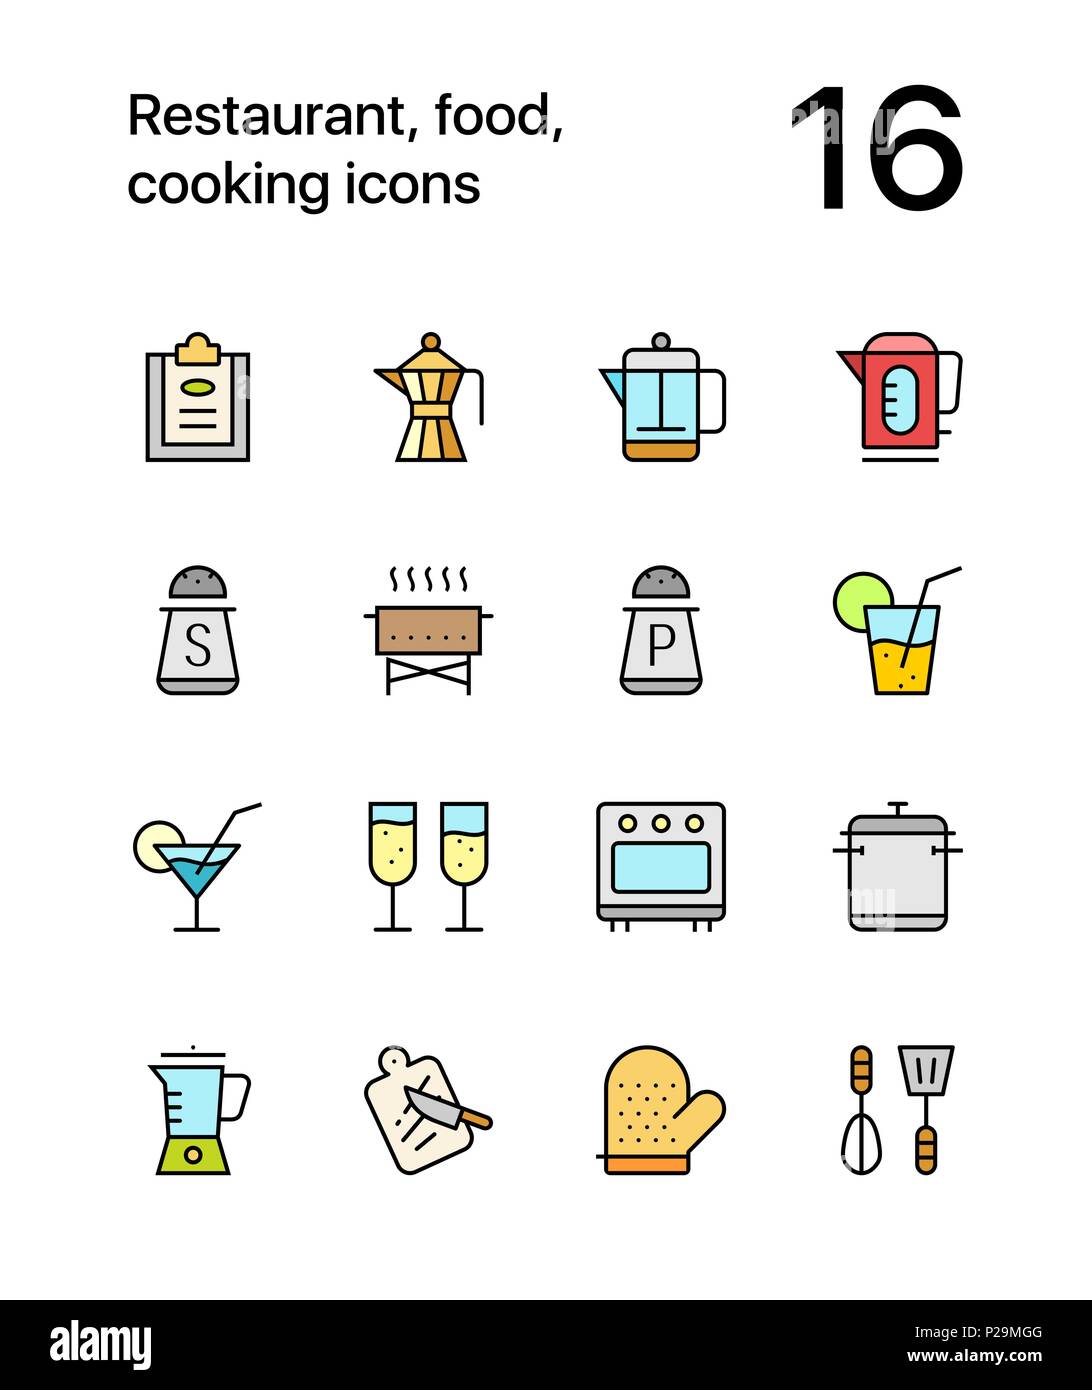 Colored Restaurant, food, cooking icons for web and mobile design pack 2 Stock Vector